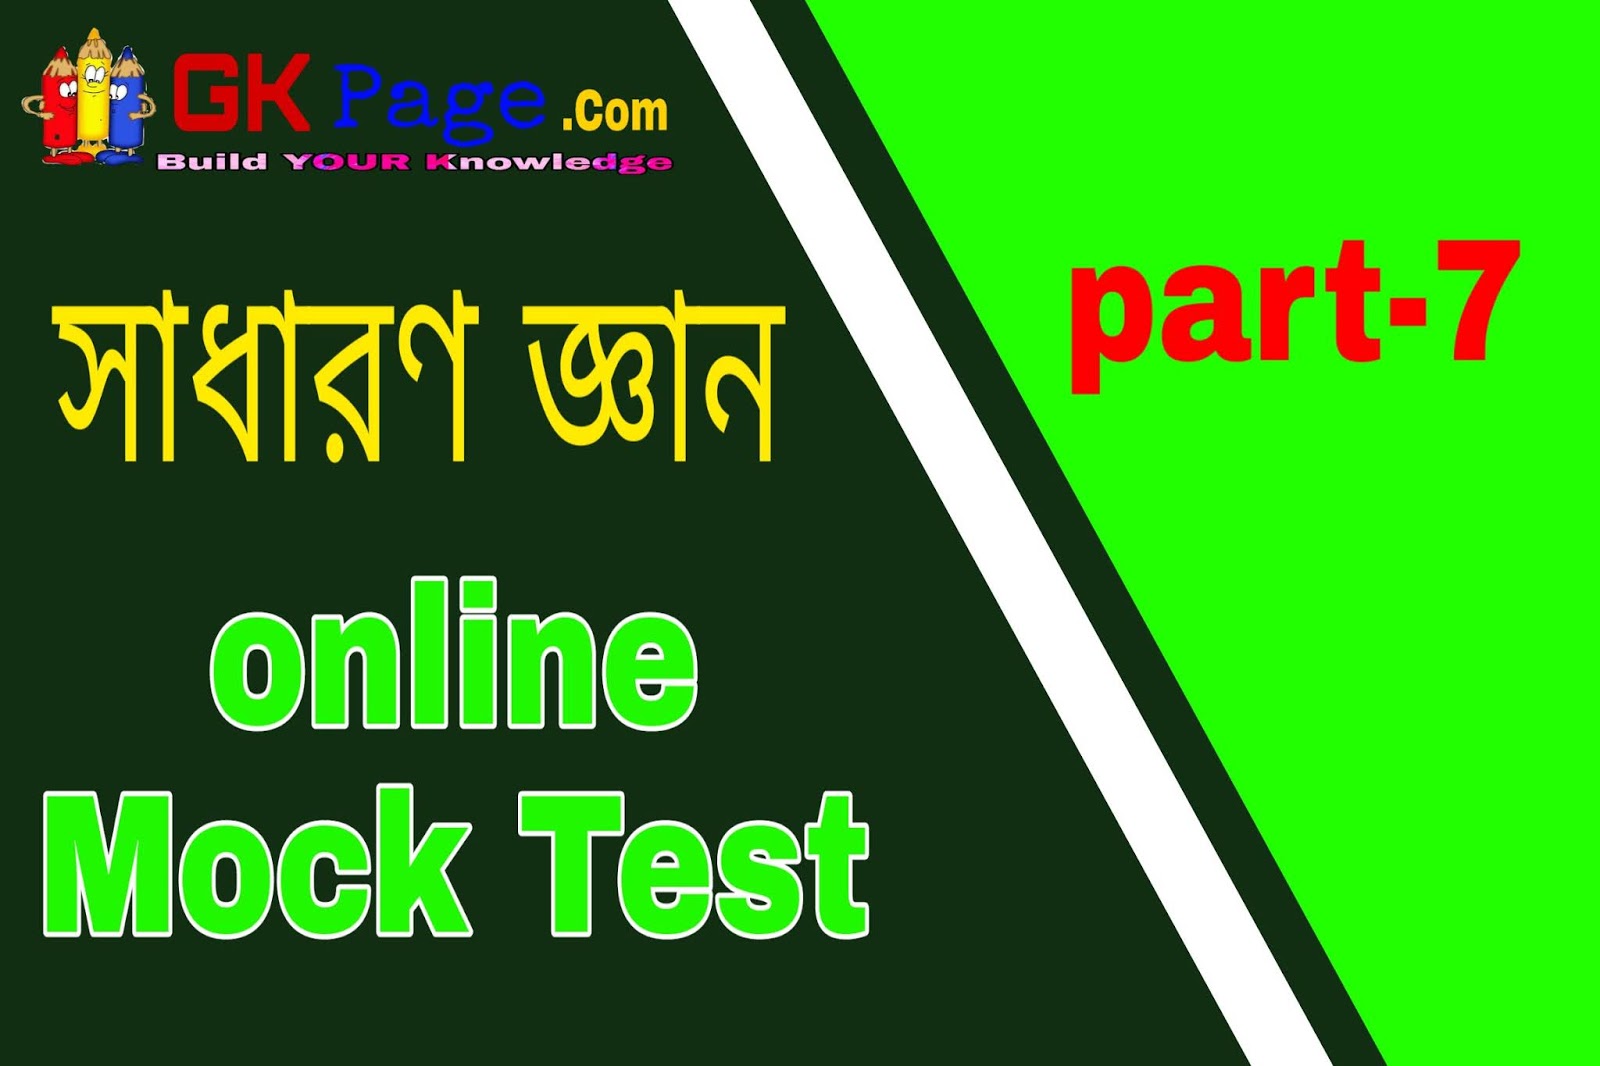 test-your-general-knowledge-quiz-general-knowledge-free-online-mock-test-gkpage-build